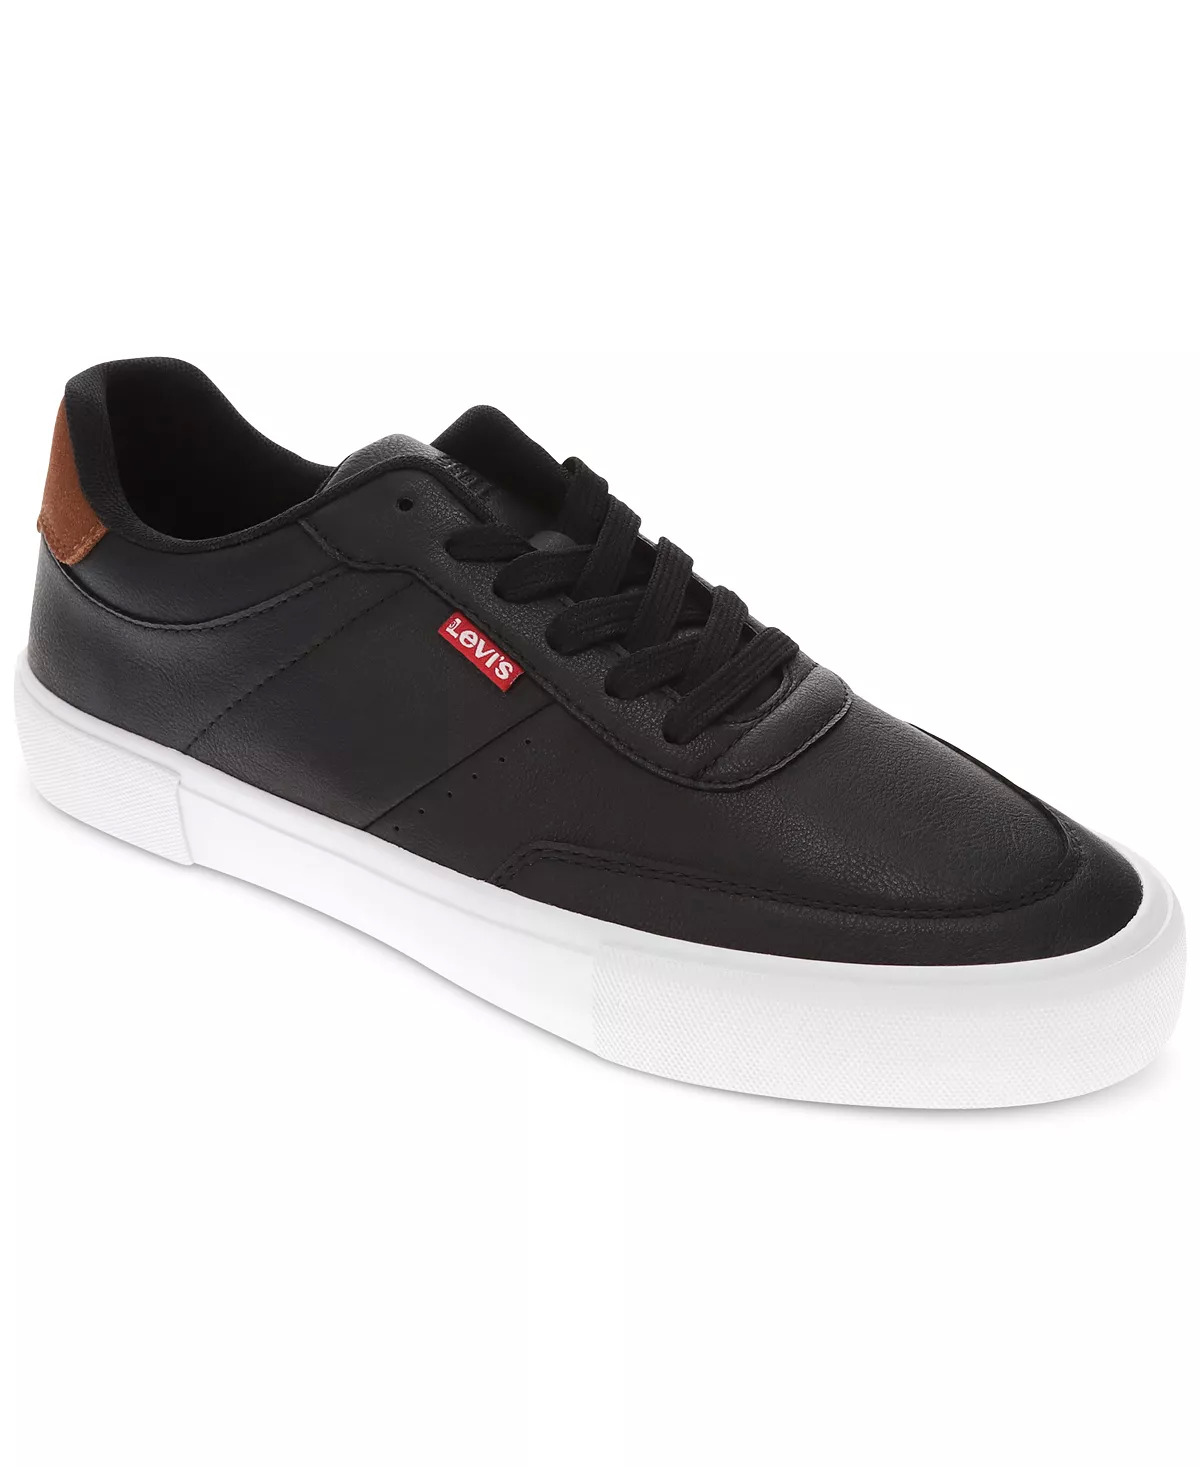 Men's Sneakers & Shoes: Levi's Men's Anikin Lace-Up Sneakers $17.50 Levi's Anikin Canvas Sneaker $20 & More + Free Store Pickup at Macy's or F/S on $25+